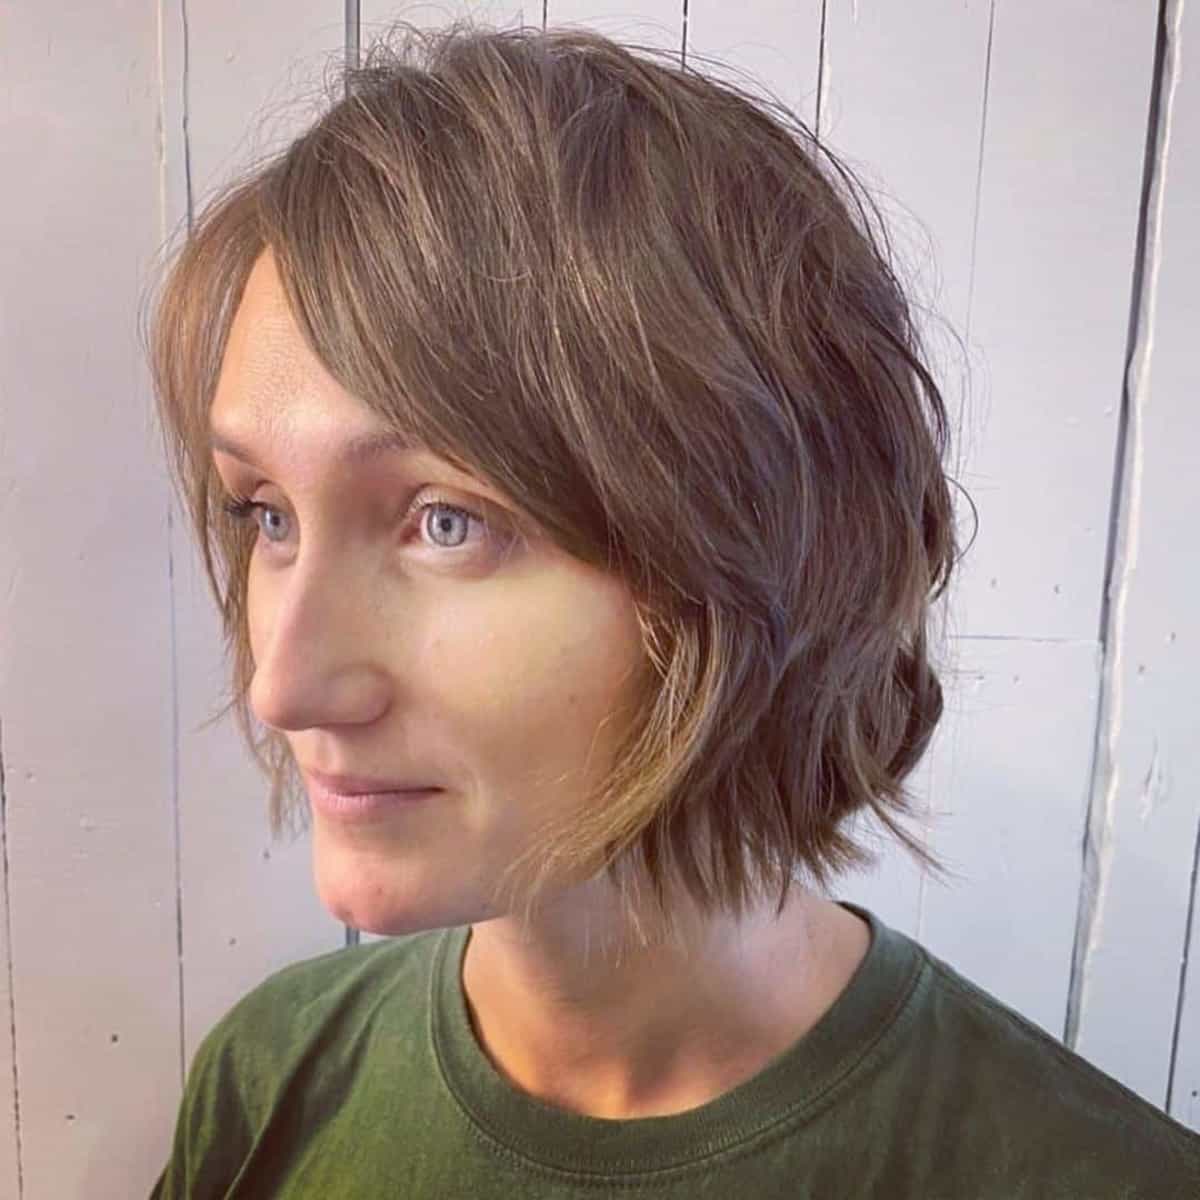 These 23 Short Shaggy Bob Haircuts Are The On-Trend Look Right Now